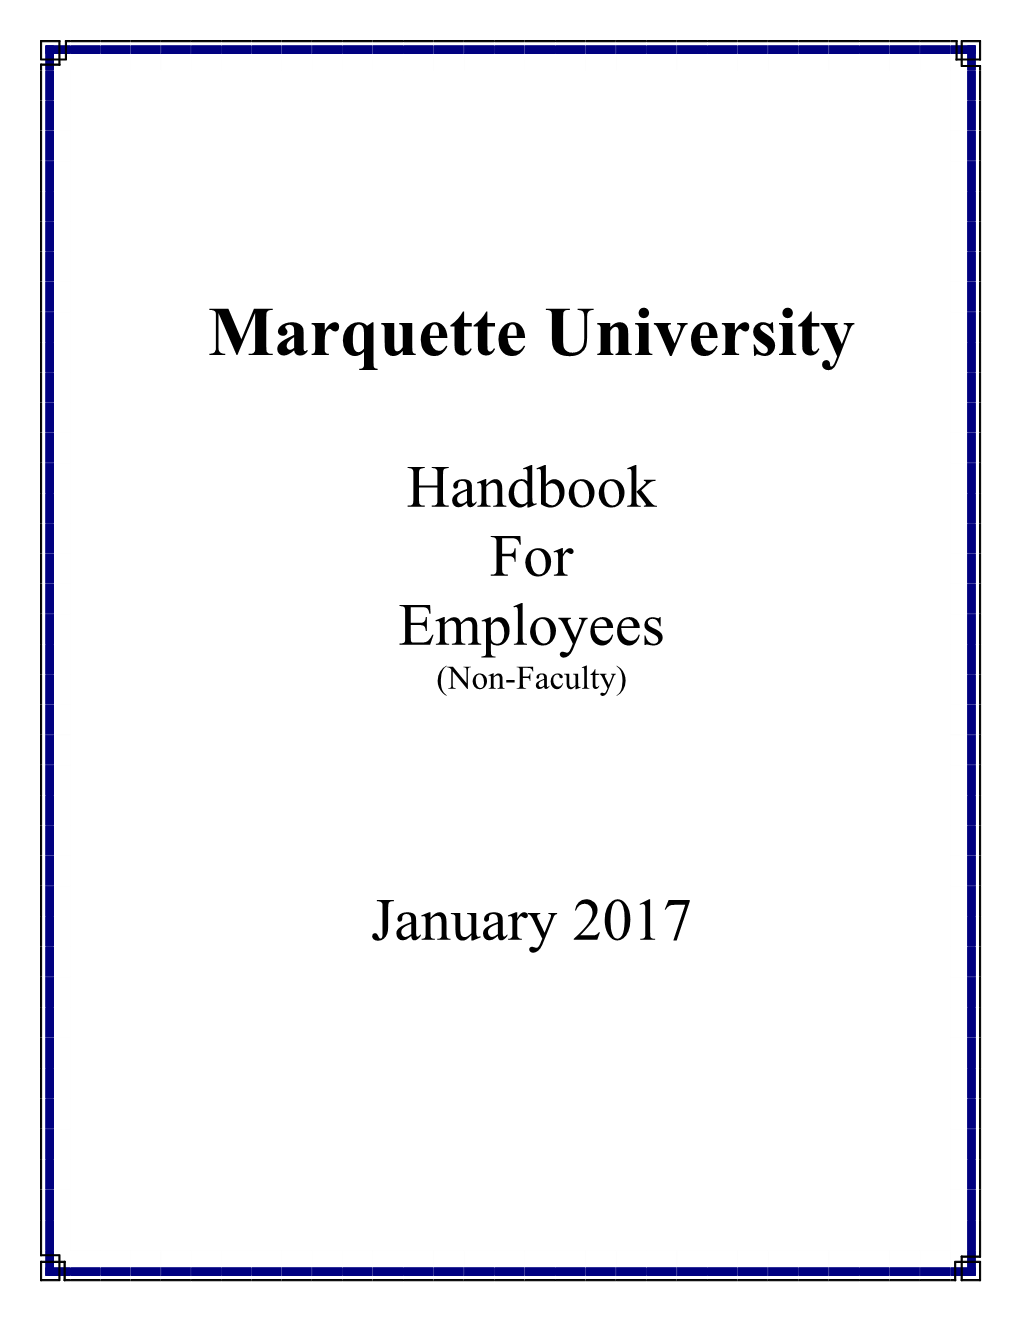 Employee Handbook (See Policy on Official Use of E-Mail to Communicate with Students., Employee Handbook) 4